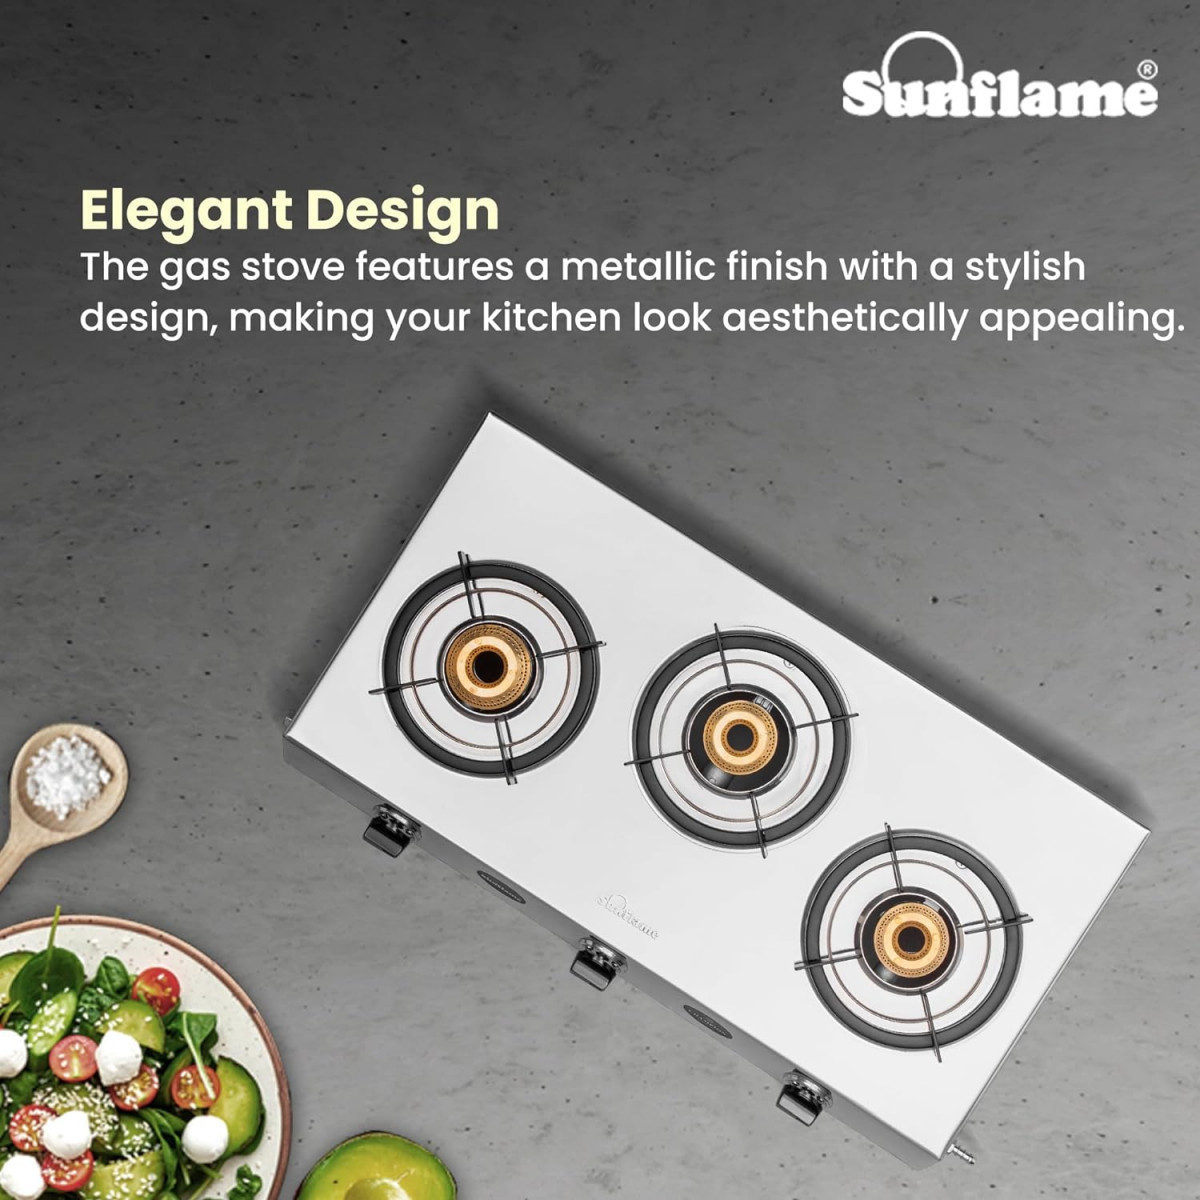 Sunflame Champion 3-Burner Gas Stove  Stainless Steel Body  2-Years Product Coverage  1 Medium and 2 Small Brass Burners Euro-Coated Pan Supports  Manual Ignition  Silver